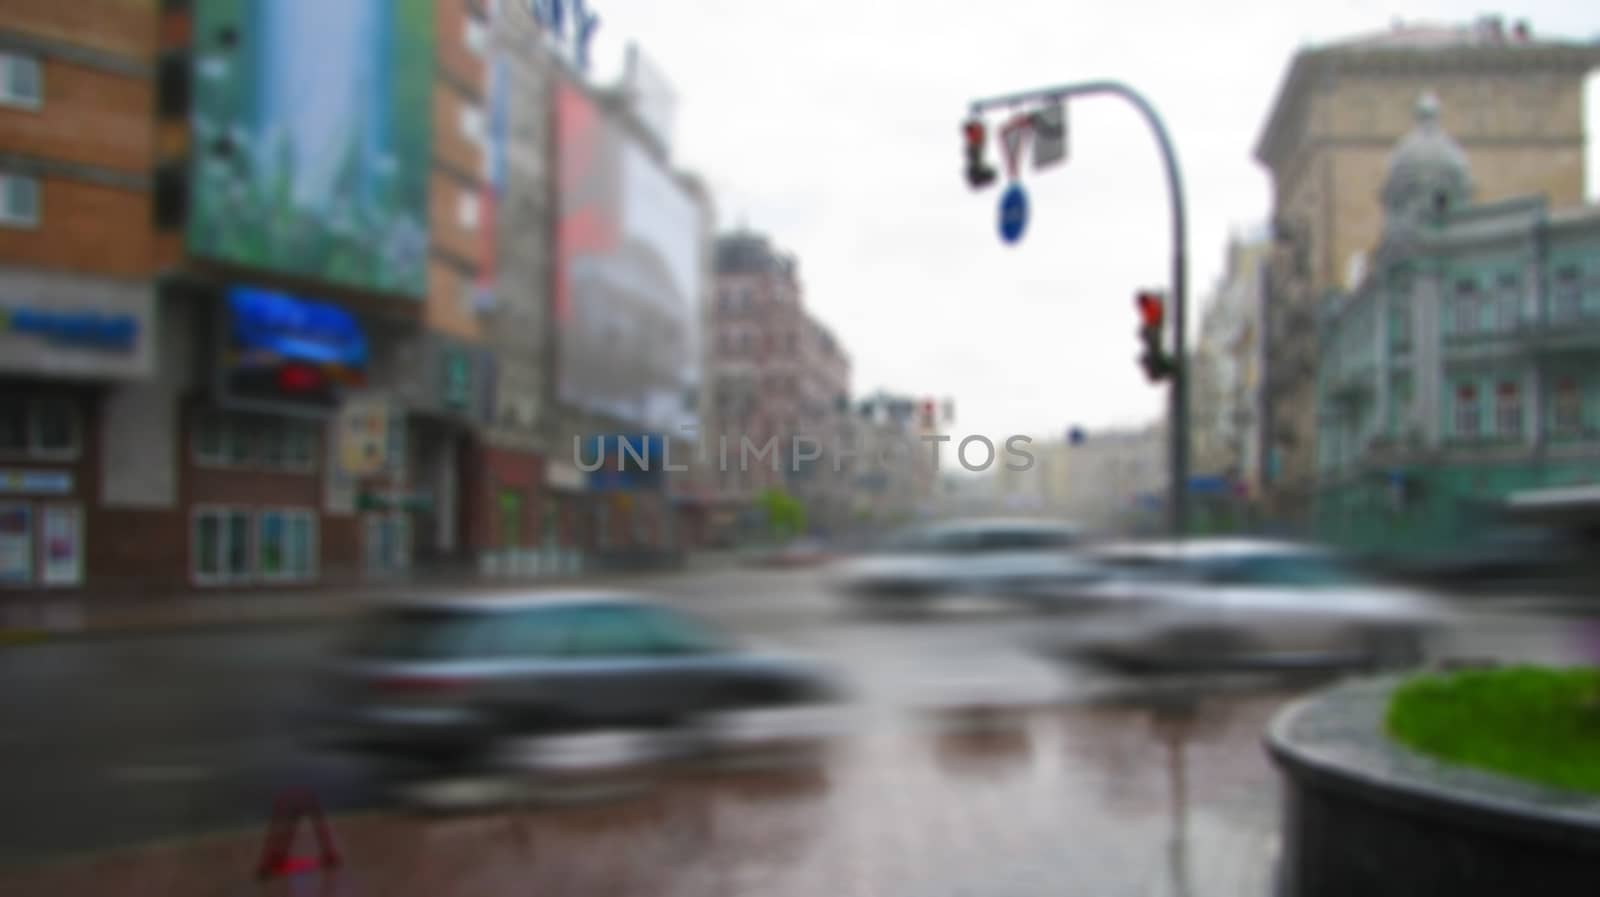 A city street with moving cars in a creative storyline with a blurred image surface